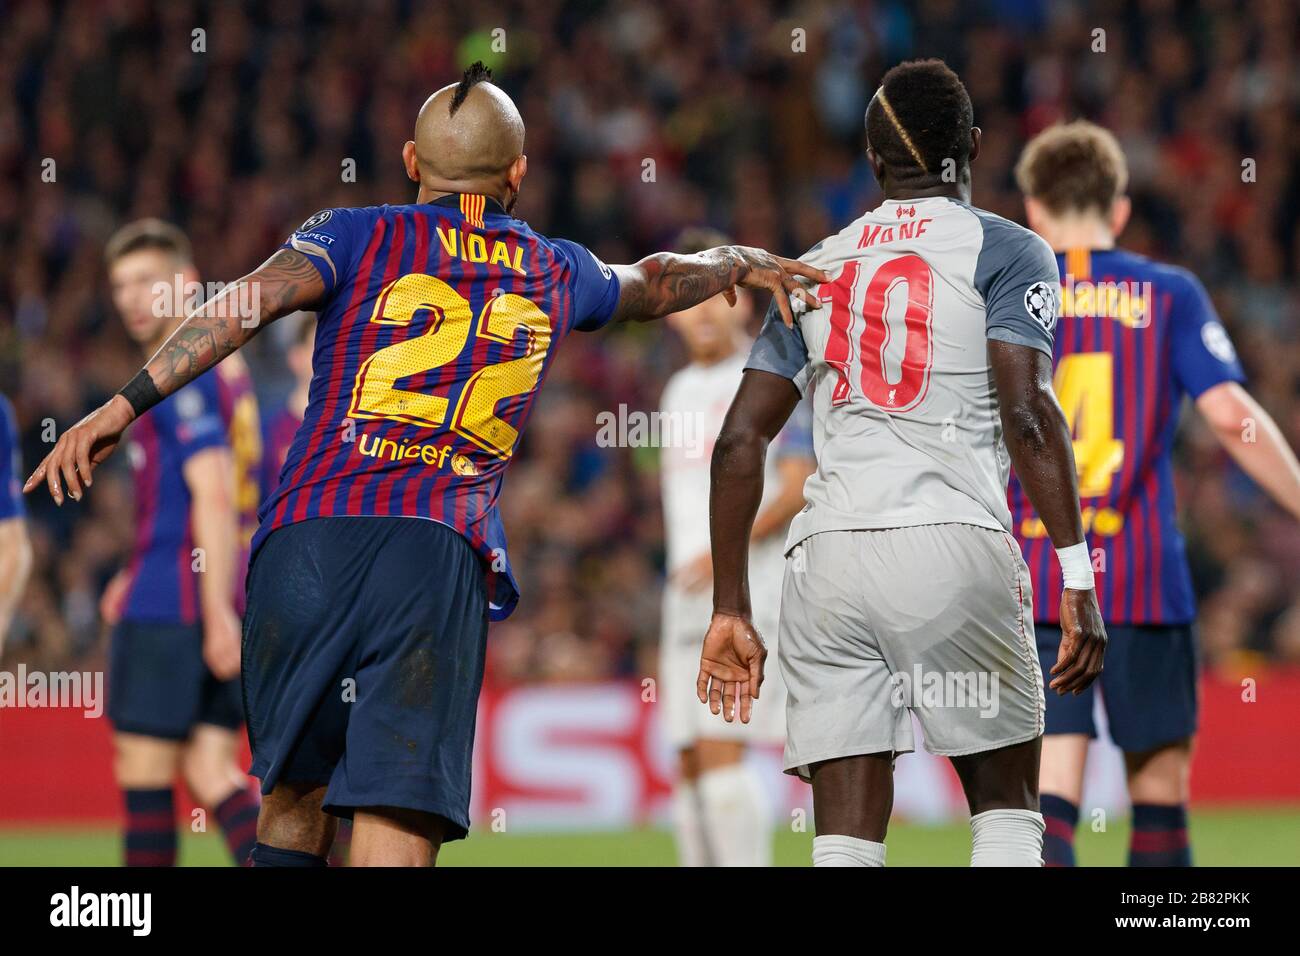 BARCELONA, SPAIN - MAY 01:  Arturo Vidal of FC Barcelona in action with Sadio Mane of Liverpool during the UEFA Champions League Semi Final first leg Stock Photo